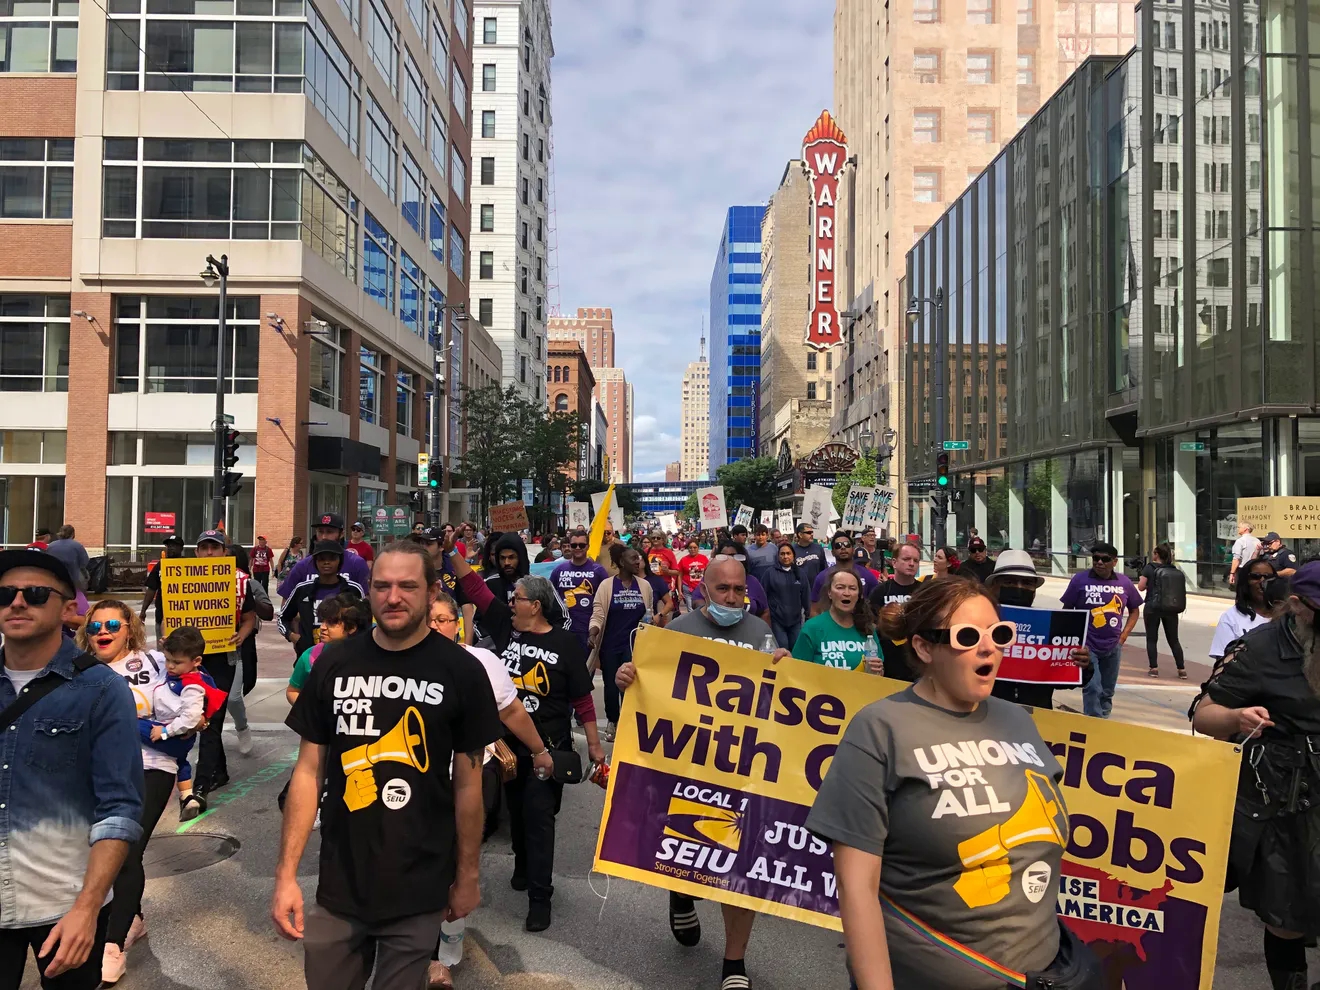 Hundreds of union members and workers at a Labor Day event march